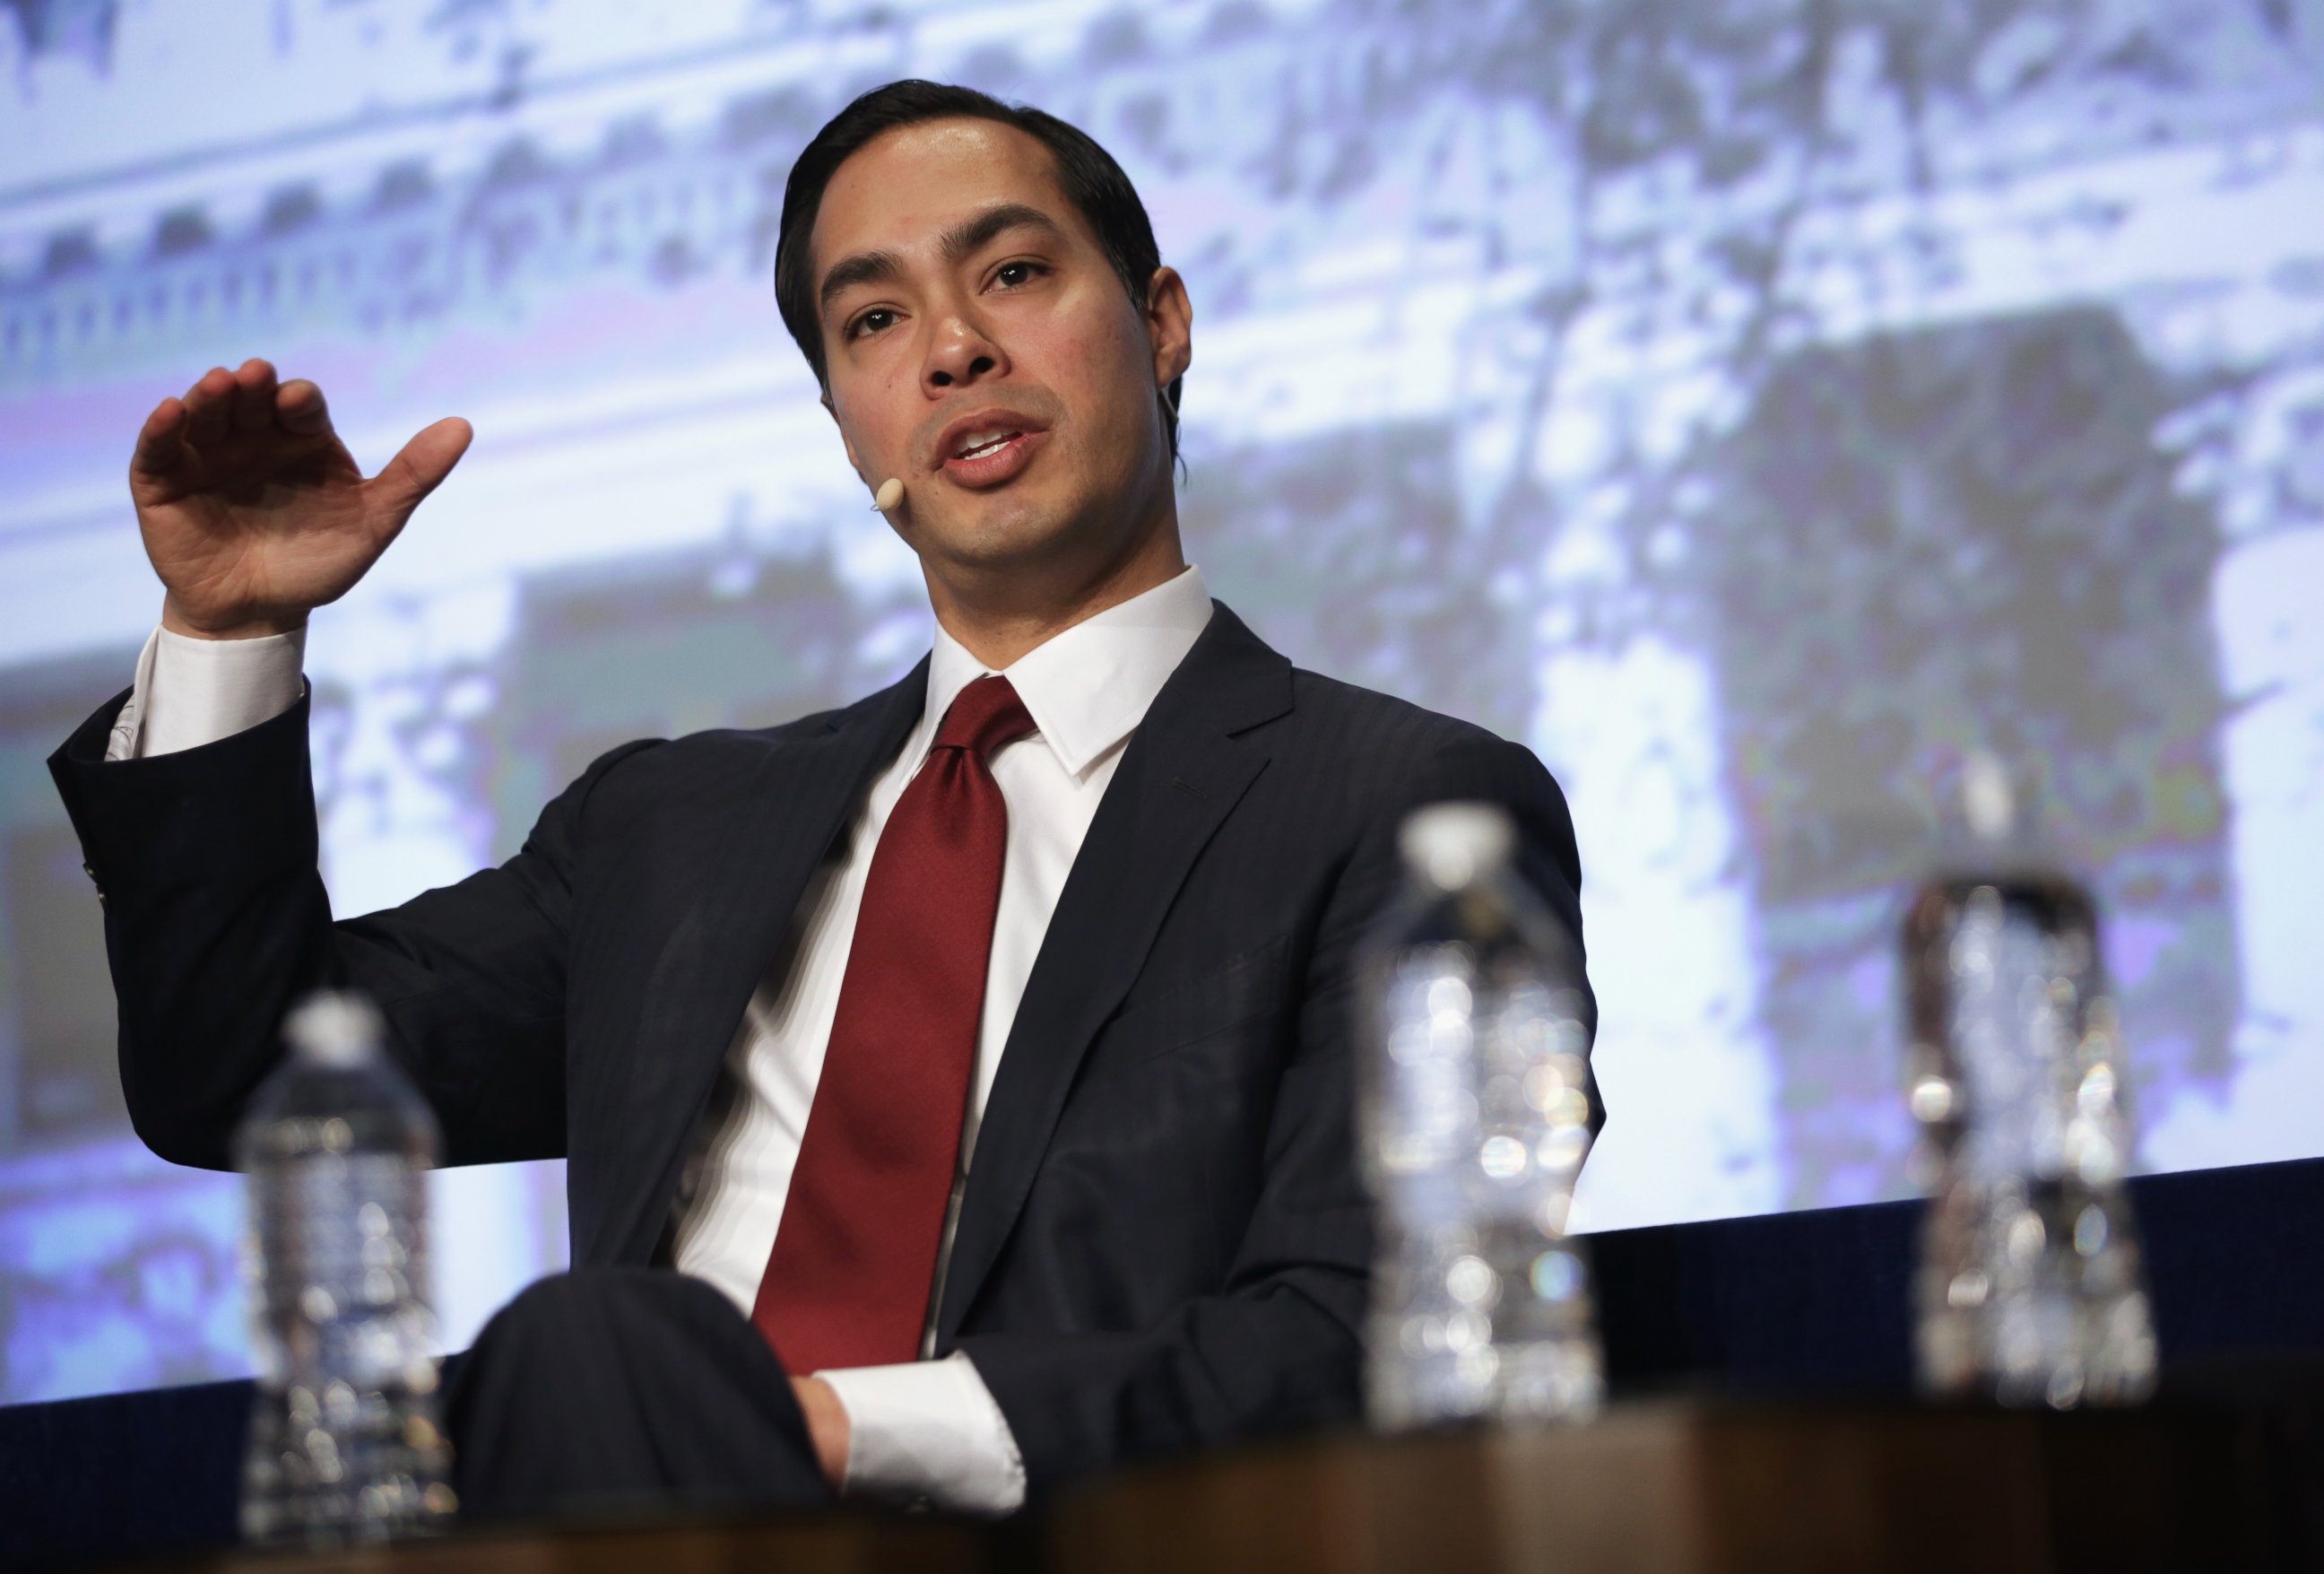 PHOTO: U.S. Secretary of Housing and Urban Development Julian Castro speaks during a discussion of the 83rd Winter Meeting of the United States Conference of Mayors, Jan. 23, 2015 in Washington.